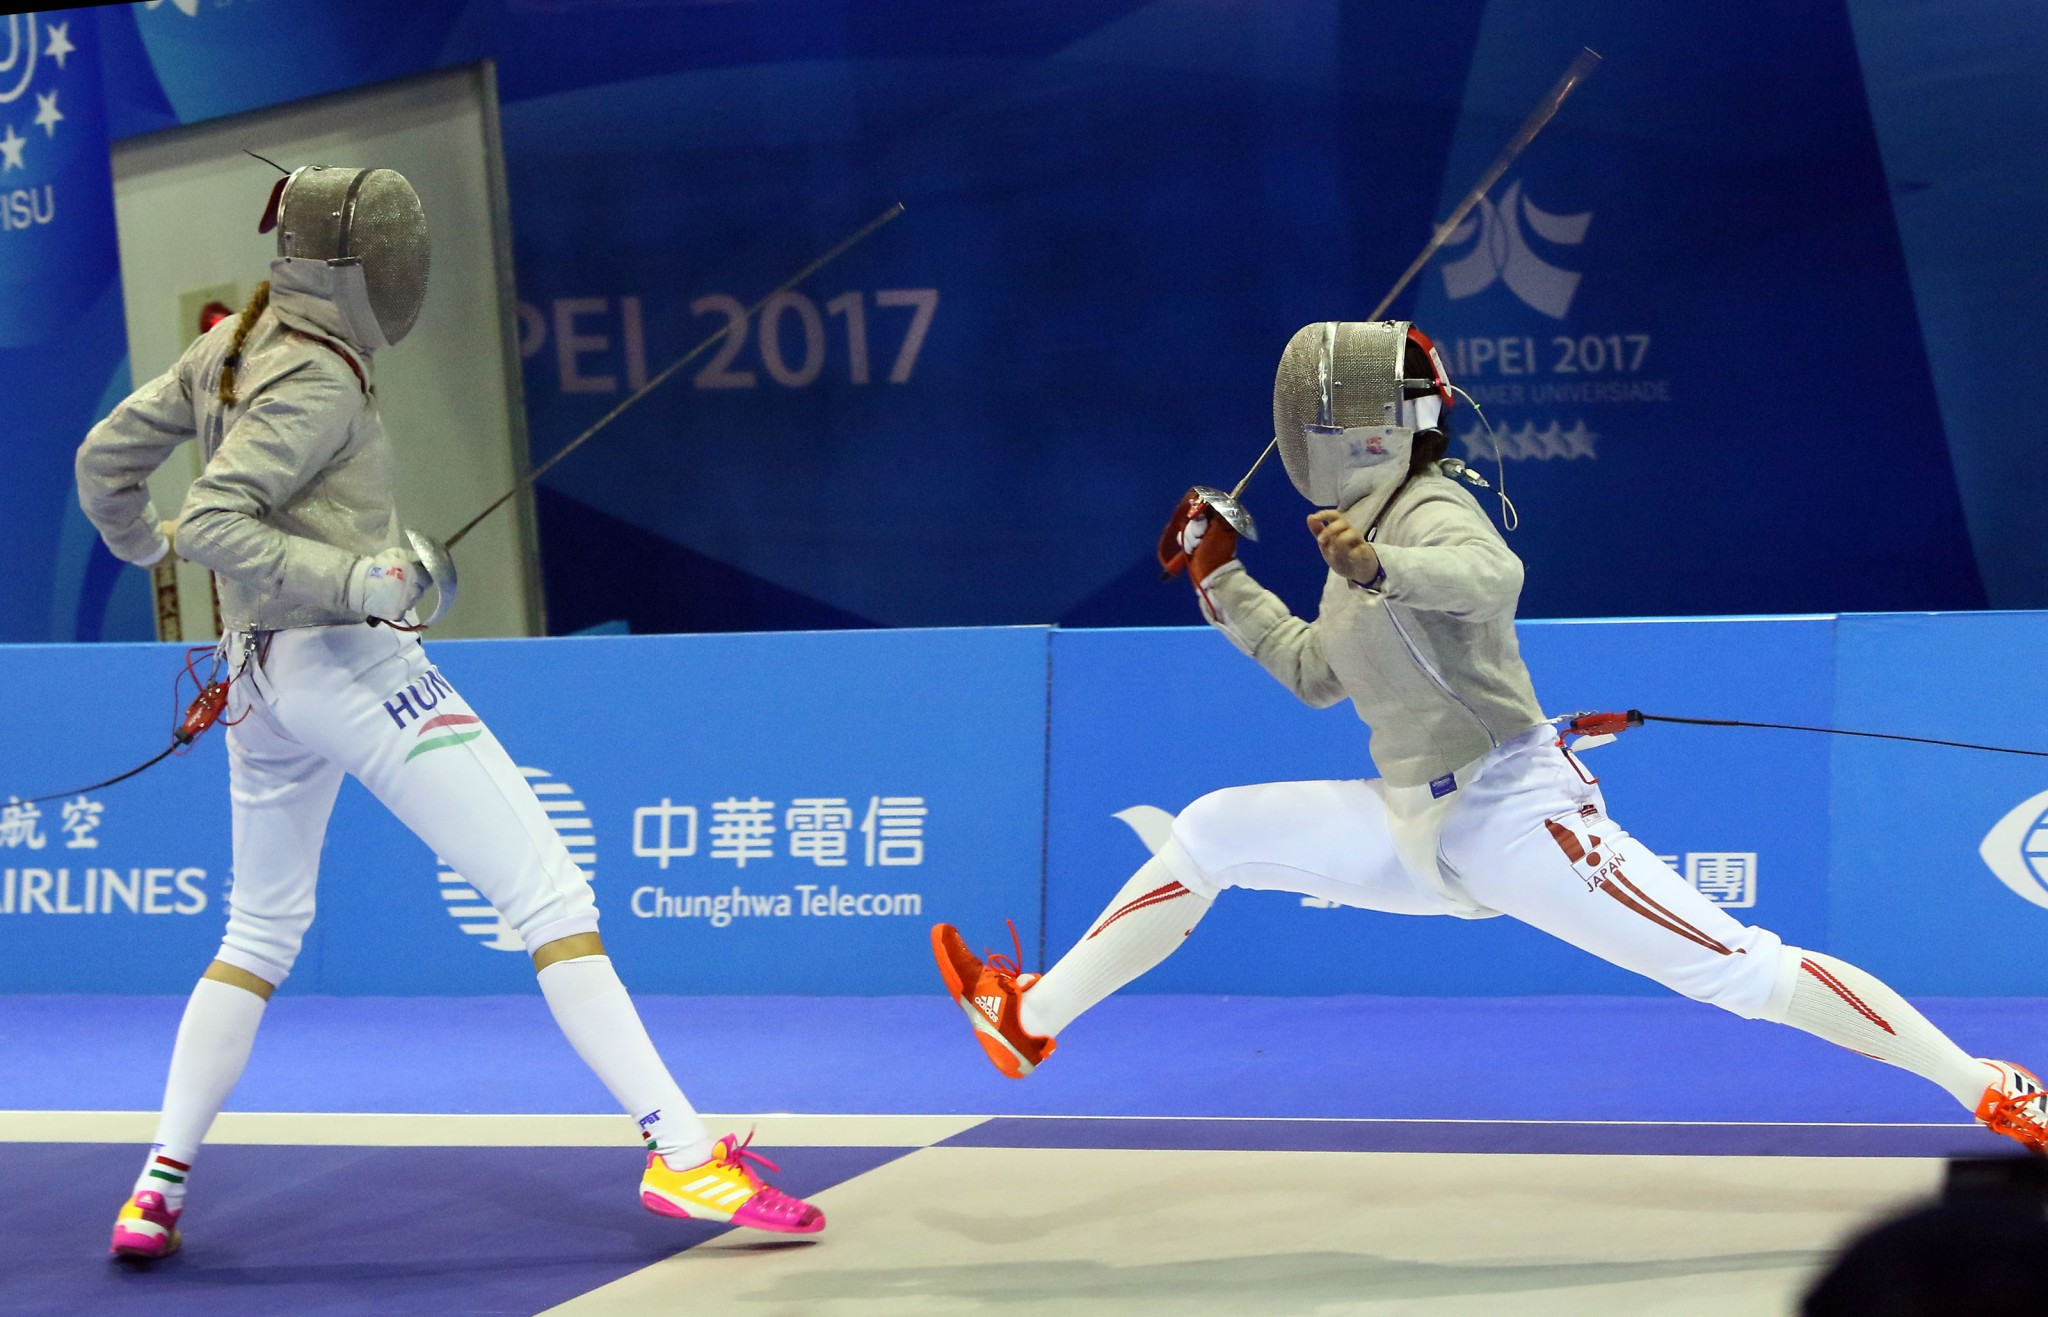 Japan won the final two team fencing titles ©Taipei 2017